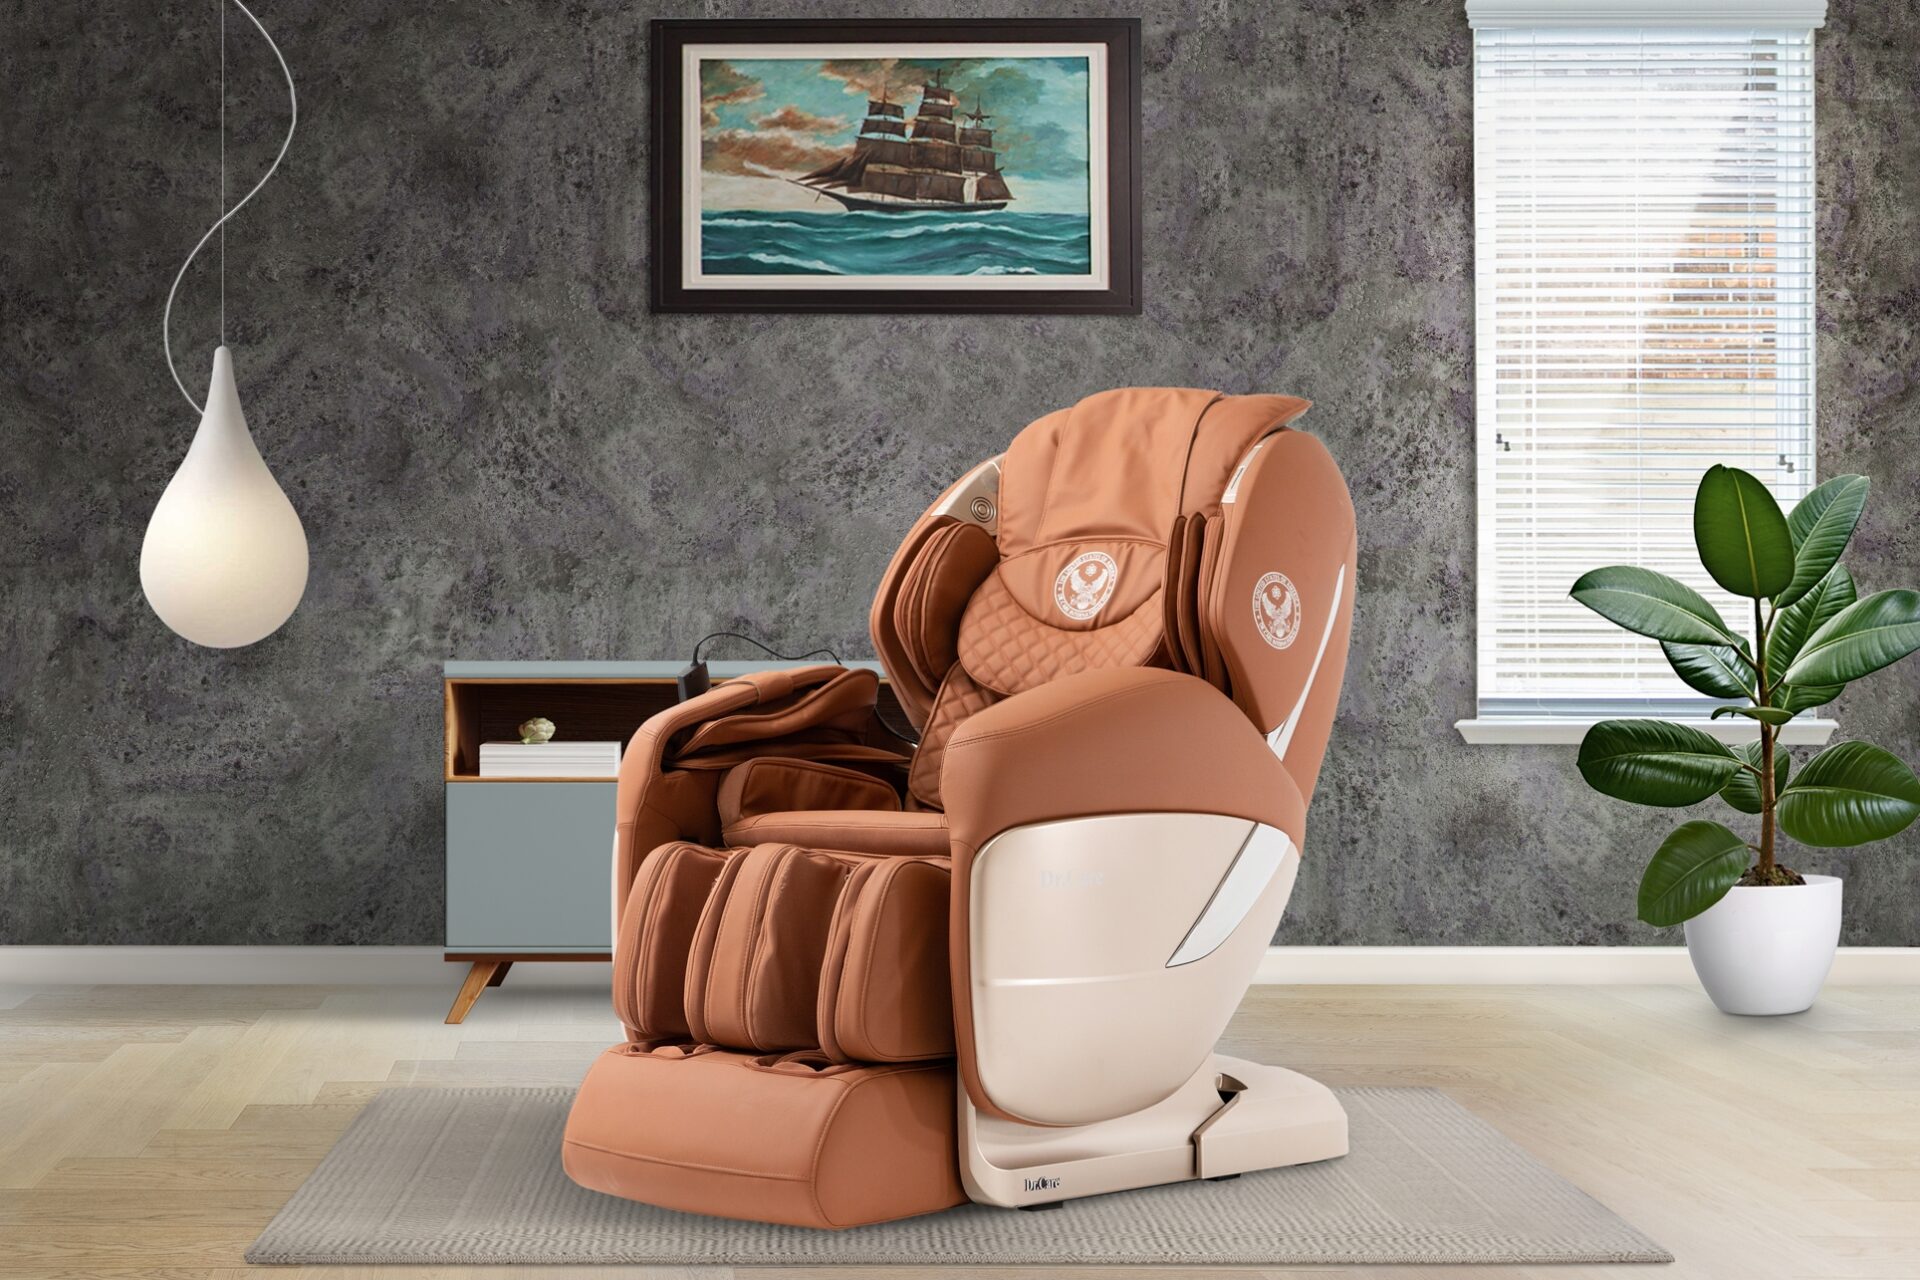 Dr.Care DR-XR 955 XREAL Full-body Massage-Chair lifestyle hero 2